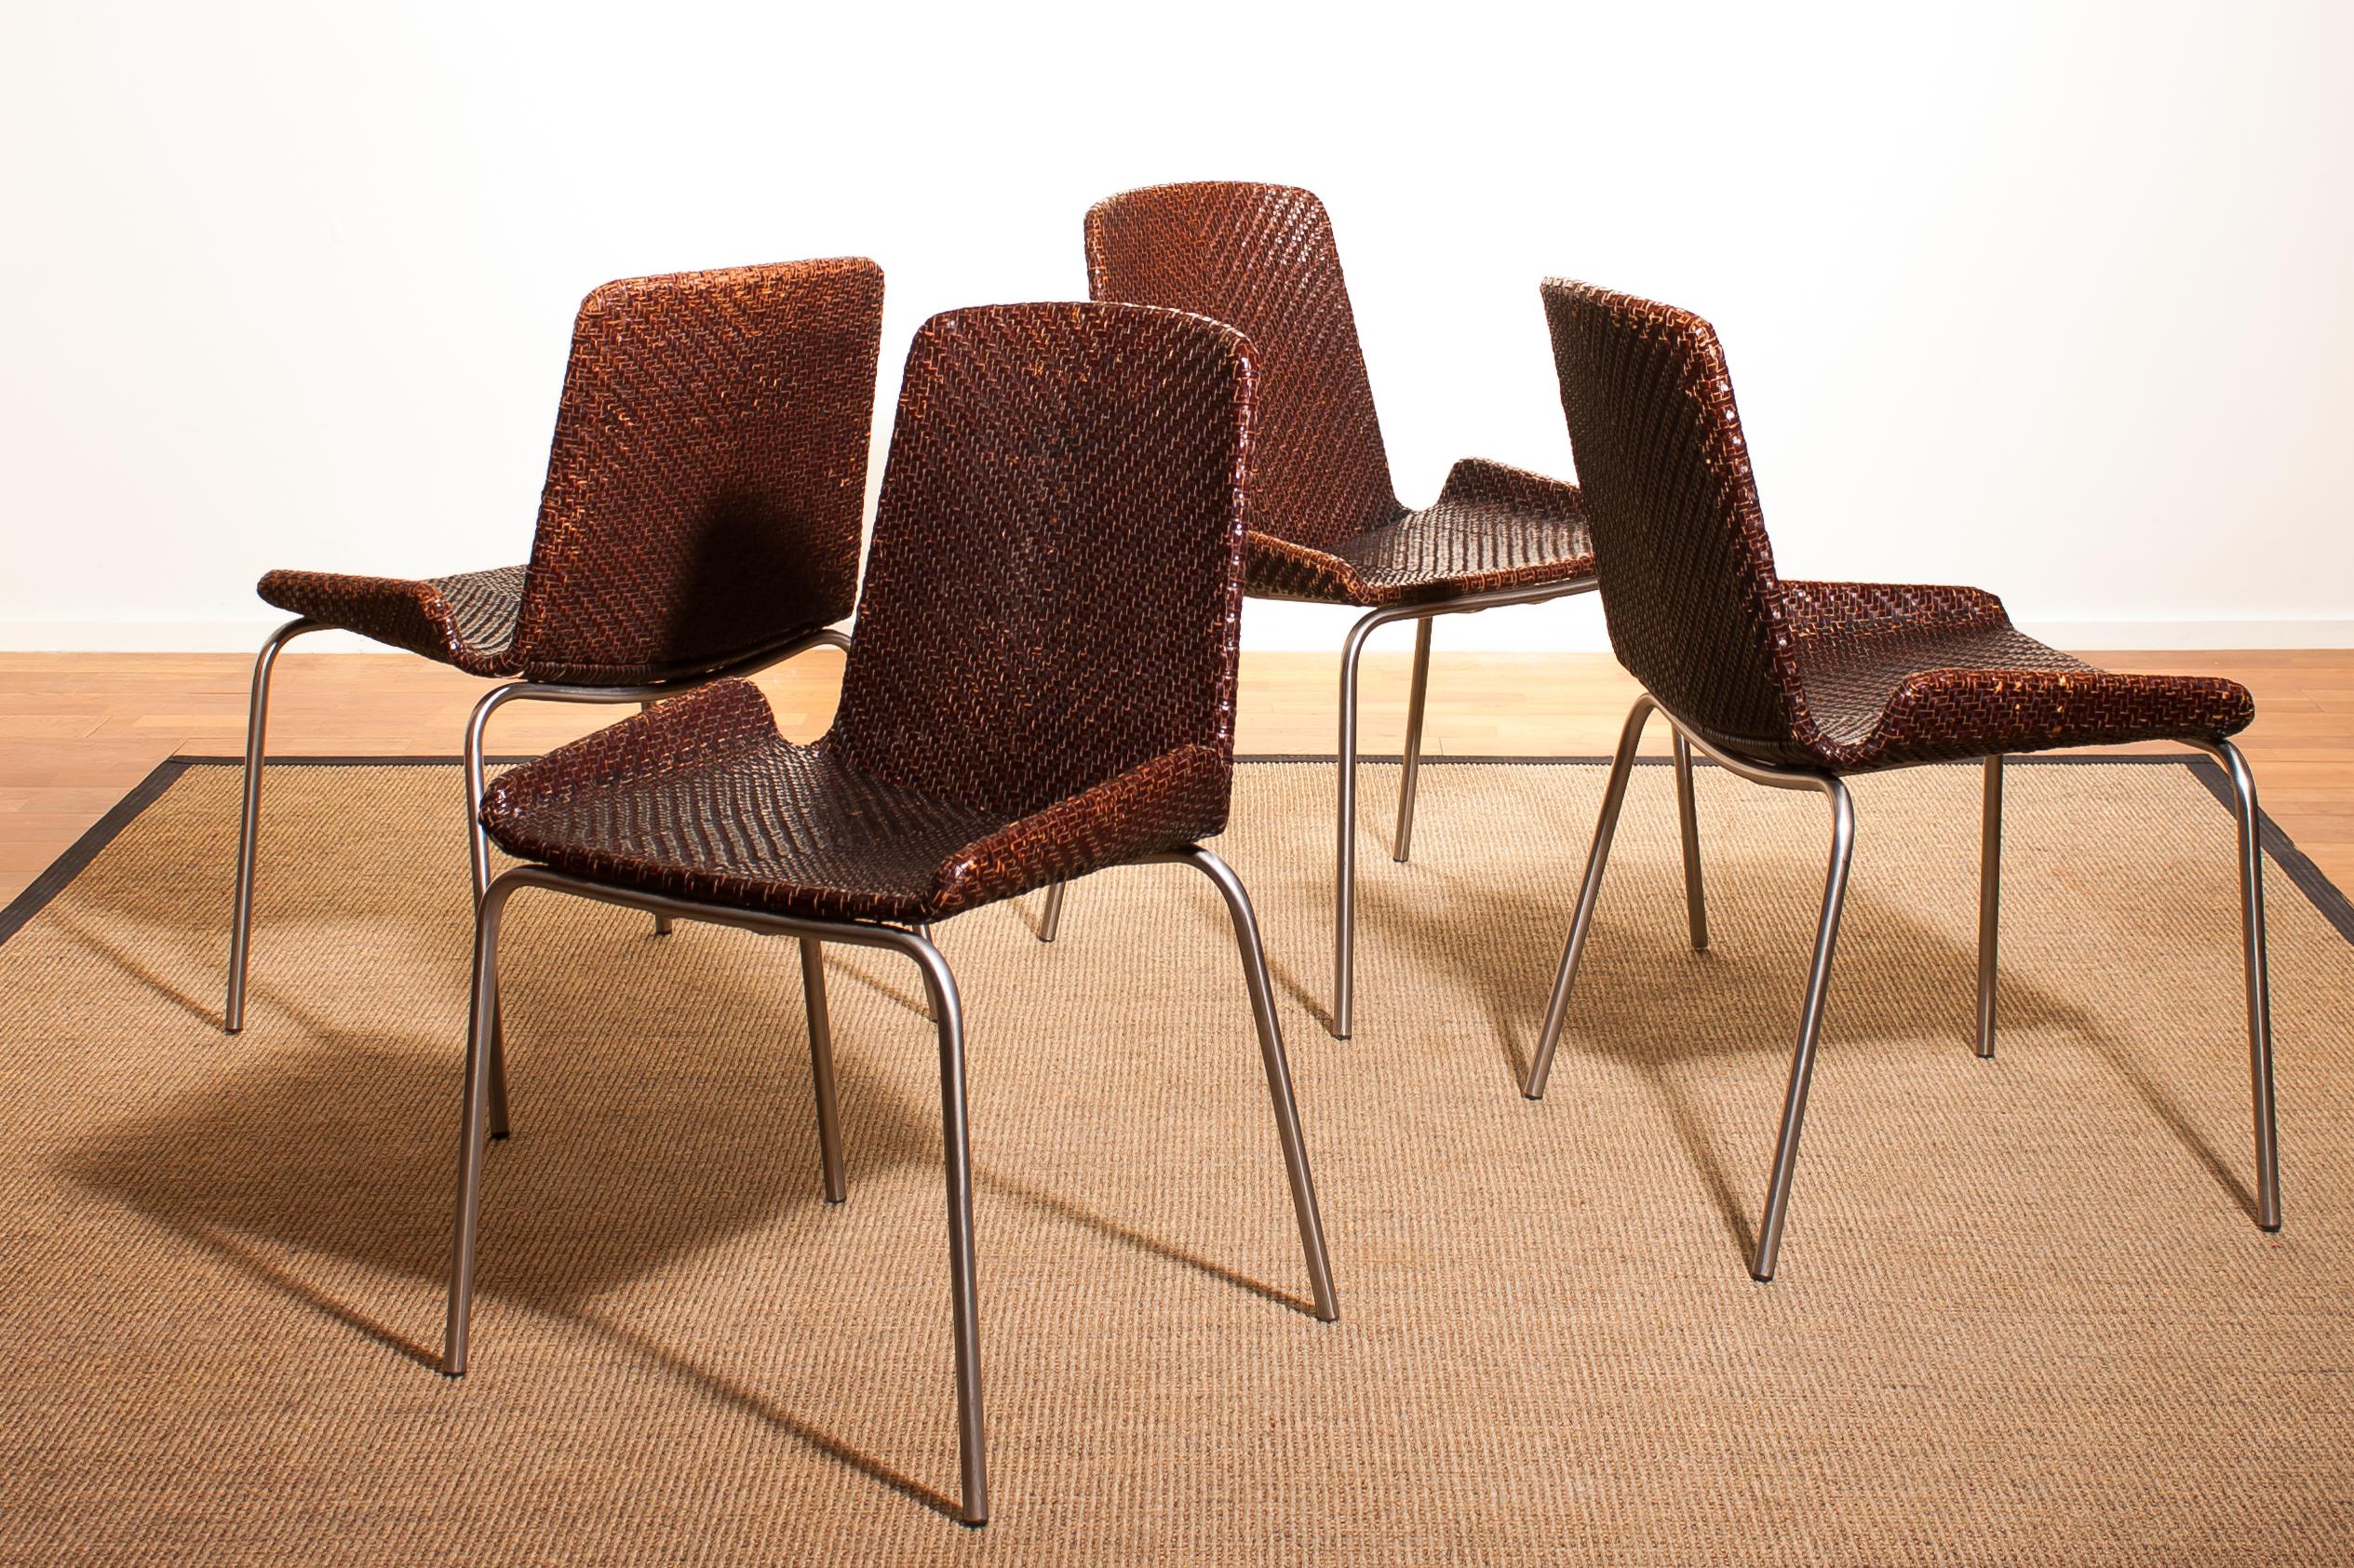 An amazing set of four dining chairs made in Italy.
These chairs have a brown leather braided seating and backrest on a steel frame.
They are in wonderful condition.
Period 1960s
Dimensions: H 84 cm, W 51 cm, D 45 cm, SH 46 cm.
   